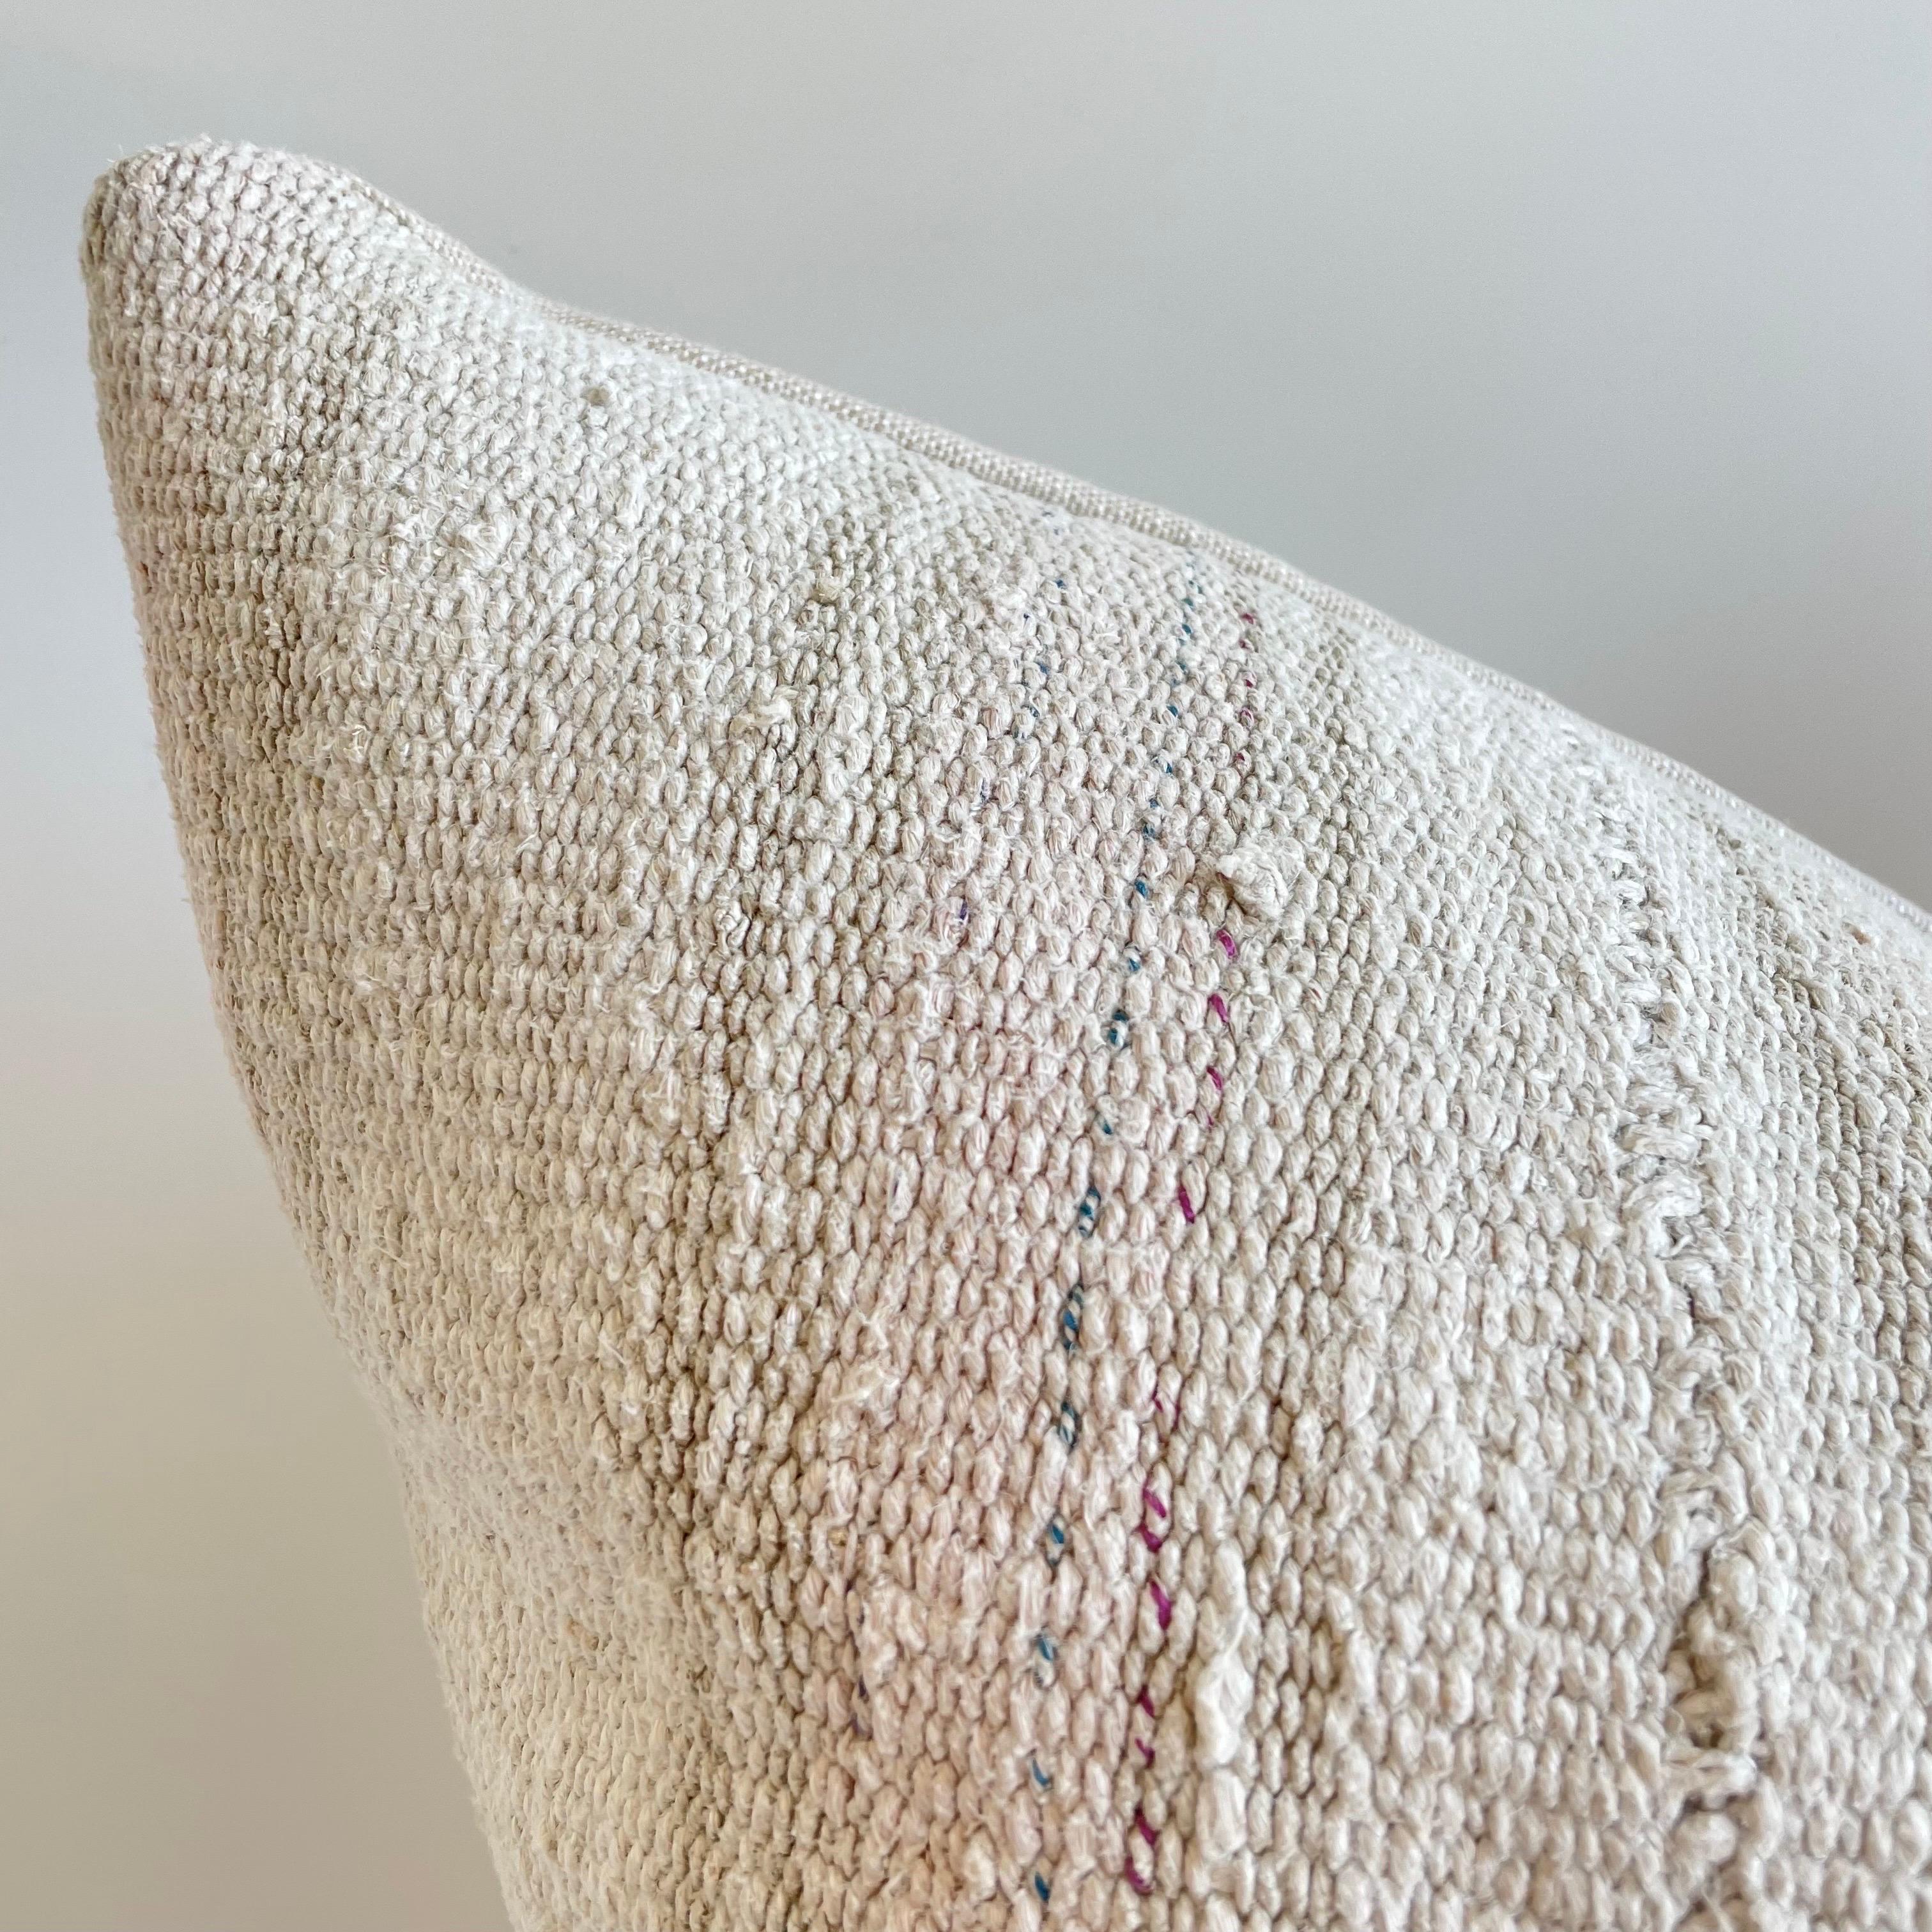 Custom Made Turkish rug Hemp pillow
Colors: Pale Blush and oatmeal / off white with linen natural stripes
Thick and soft to the touch. Pure Belgian Libeco linen backing
Solid Brass and metal zipper pulls, finished with an overlocked edge to